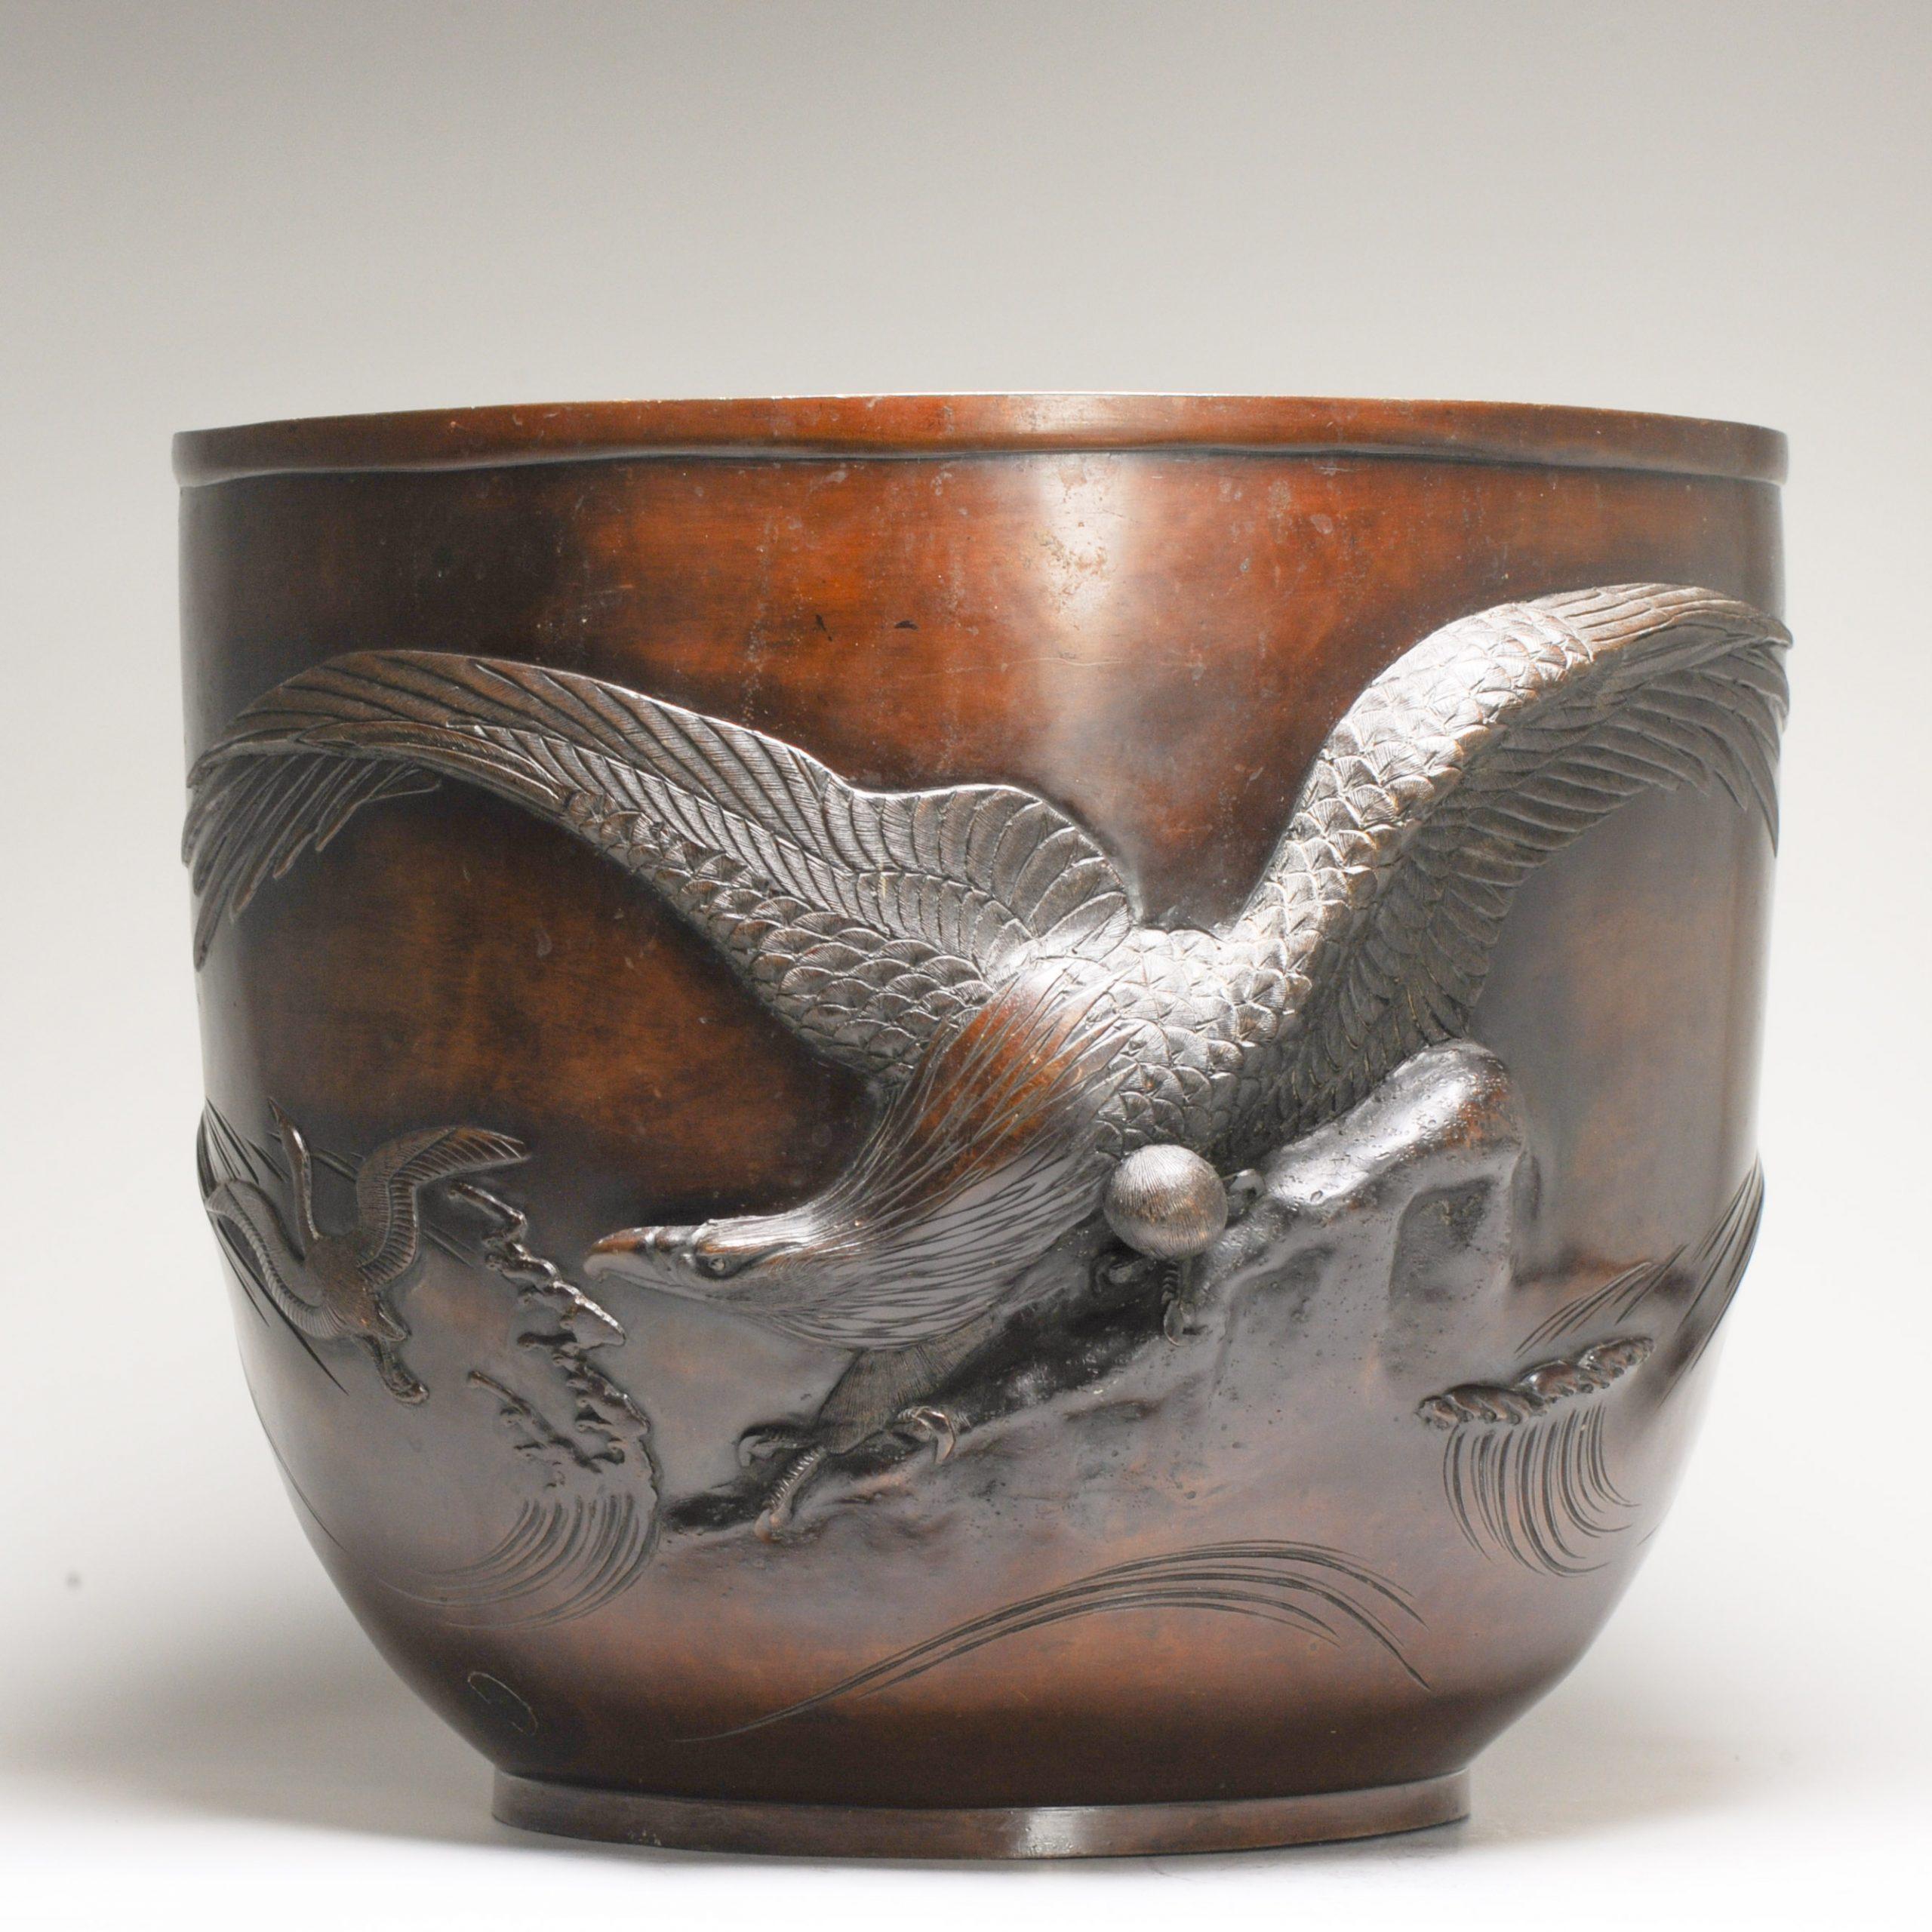 Large Antique Bronze Meiji Jardiniere with Eagle Hunting 19th C Japan, Japanese For Sale 6